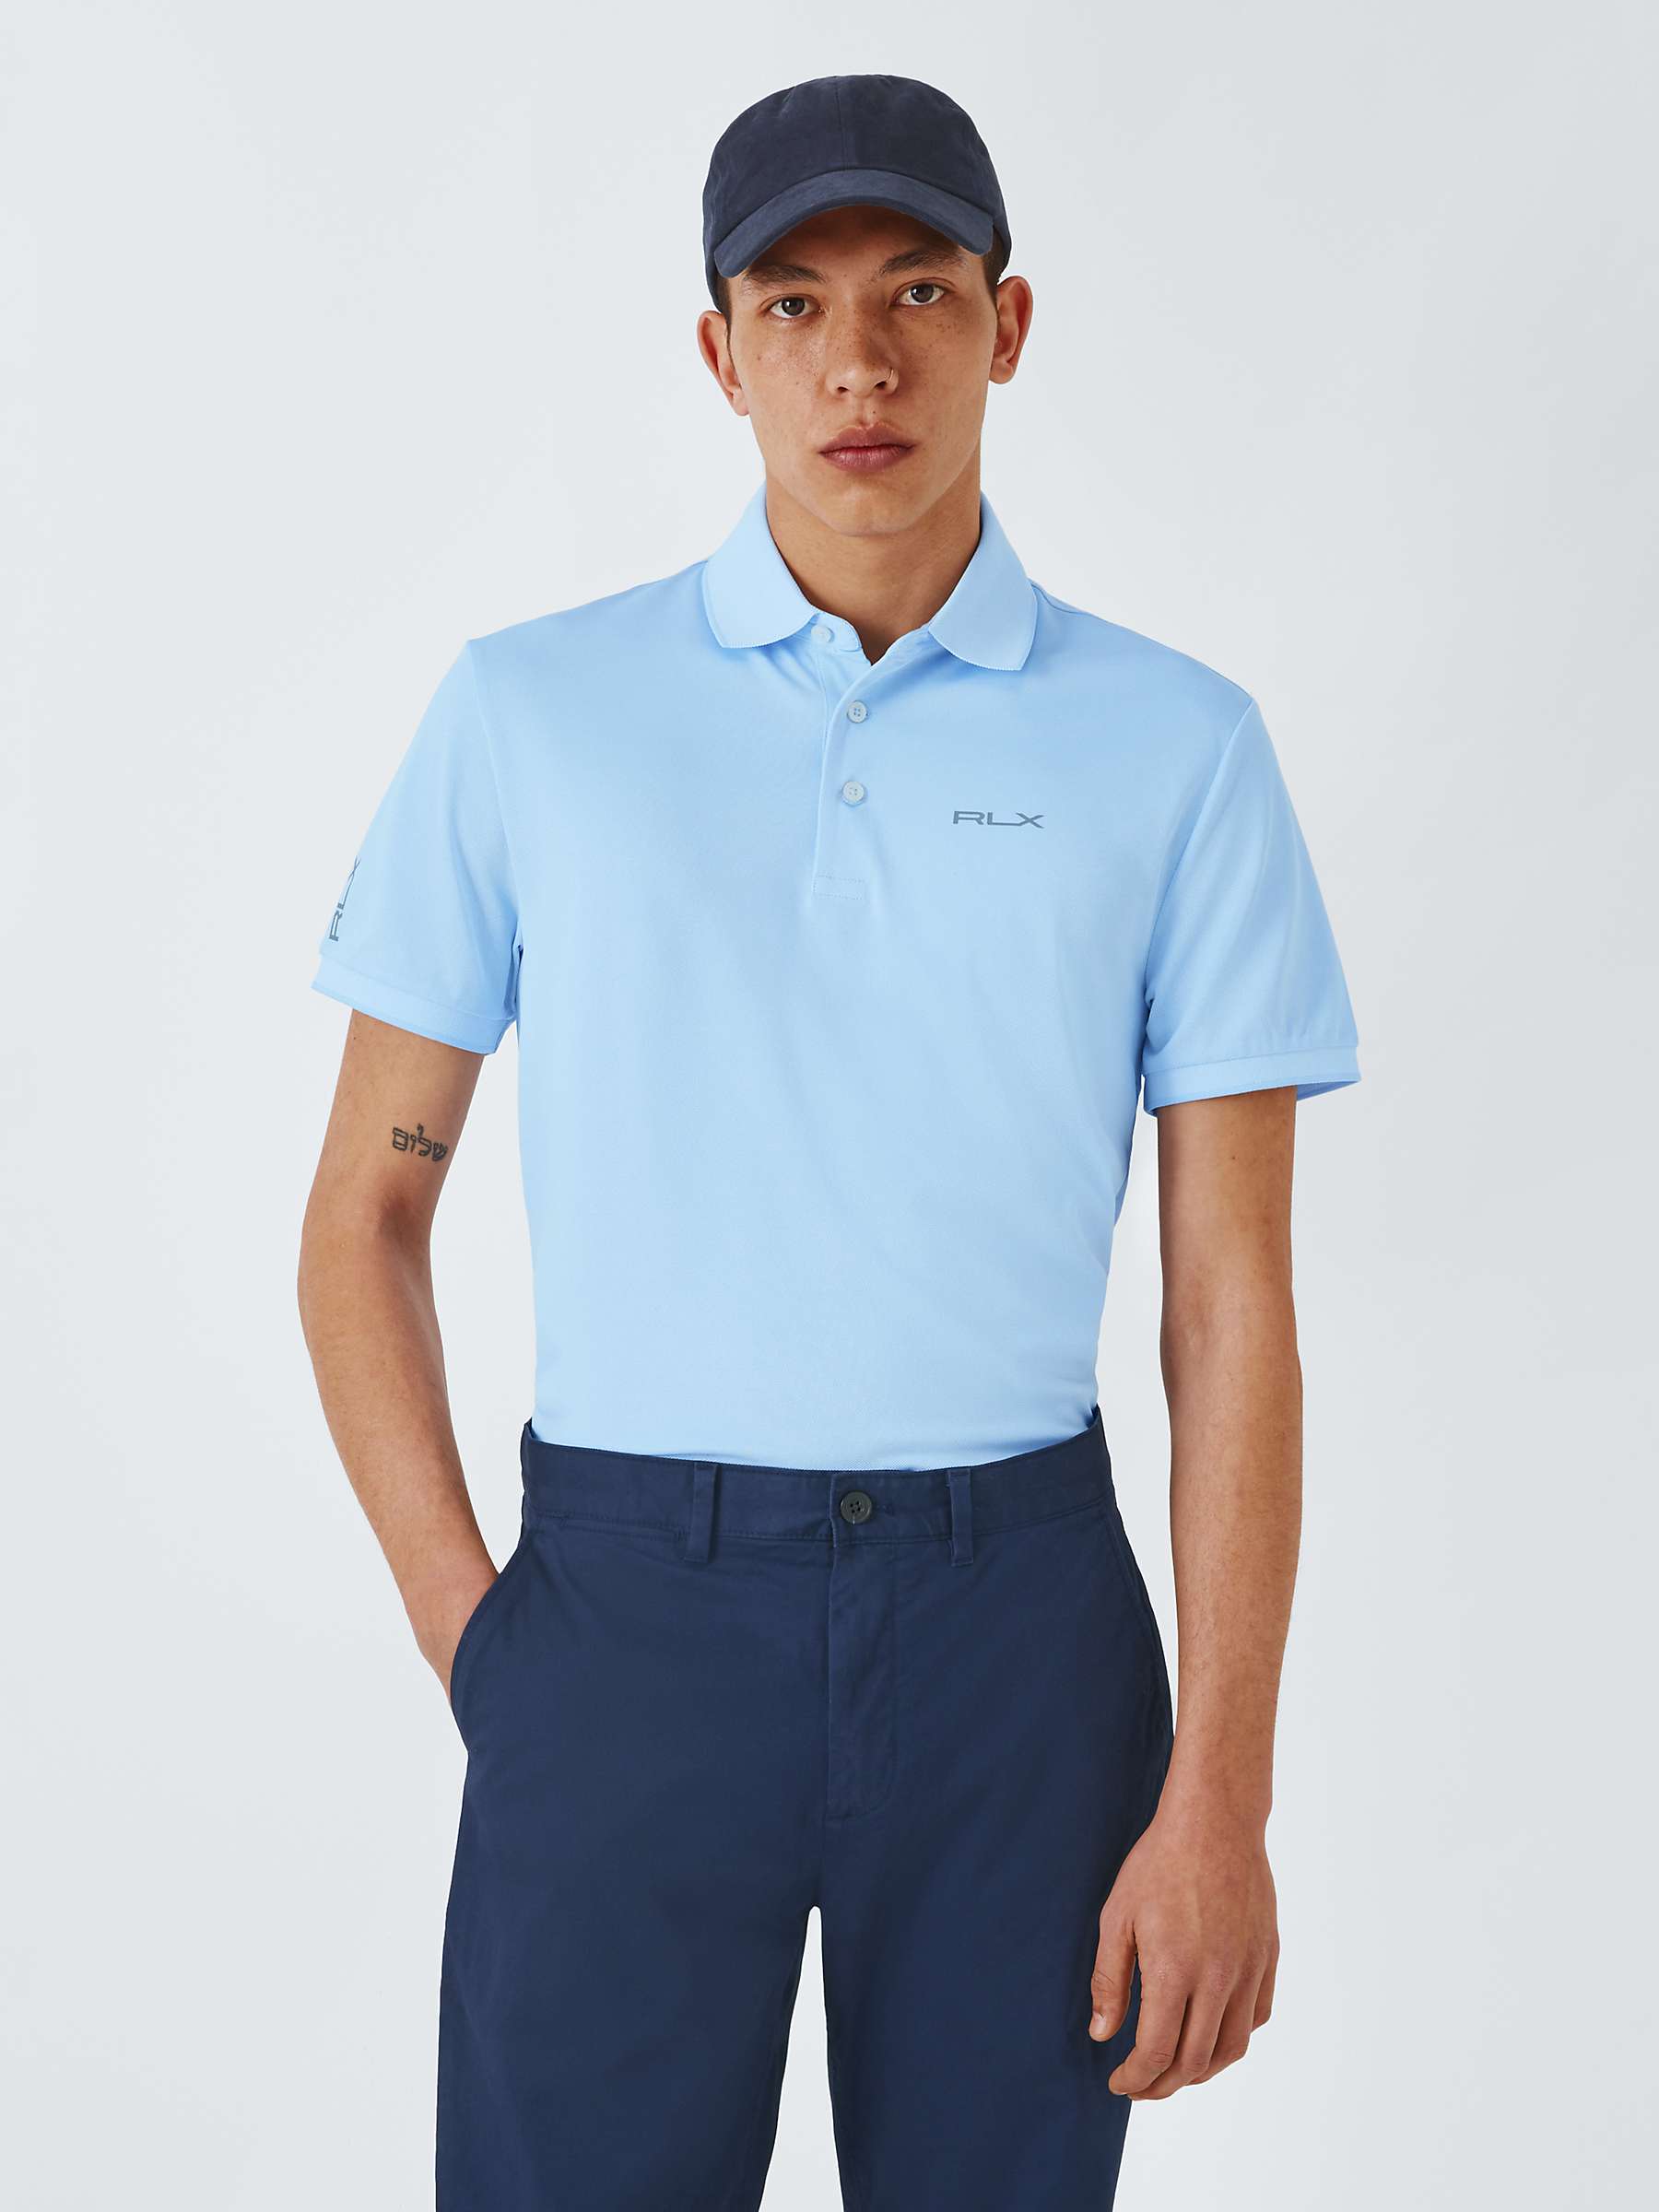 Buy Polo Golf RLX Ralph Lauren Tailored Fit Performance Polo Shirt, Office Blue Online at johnlewis.com